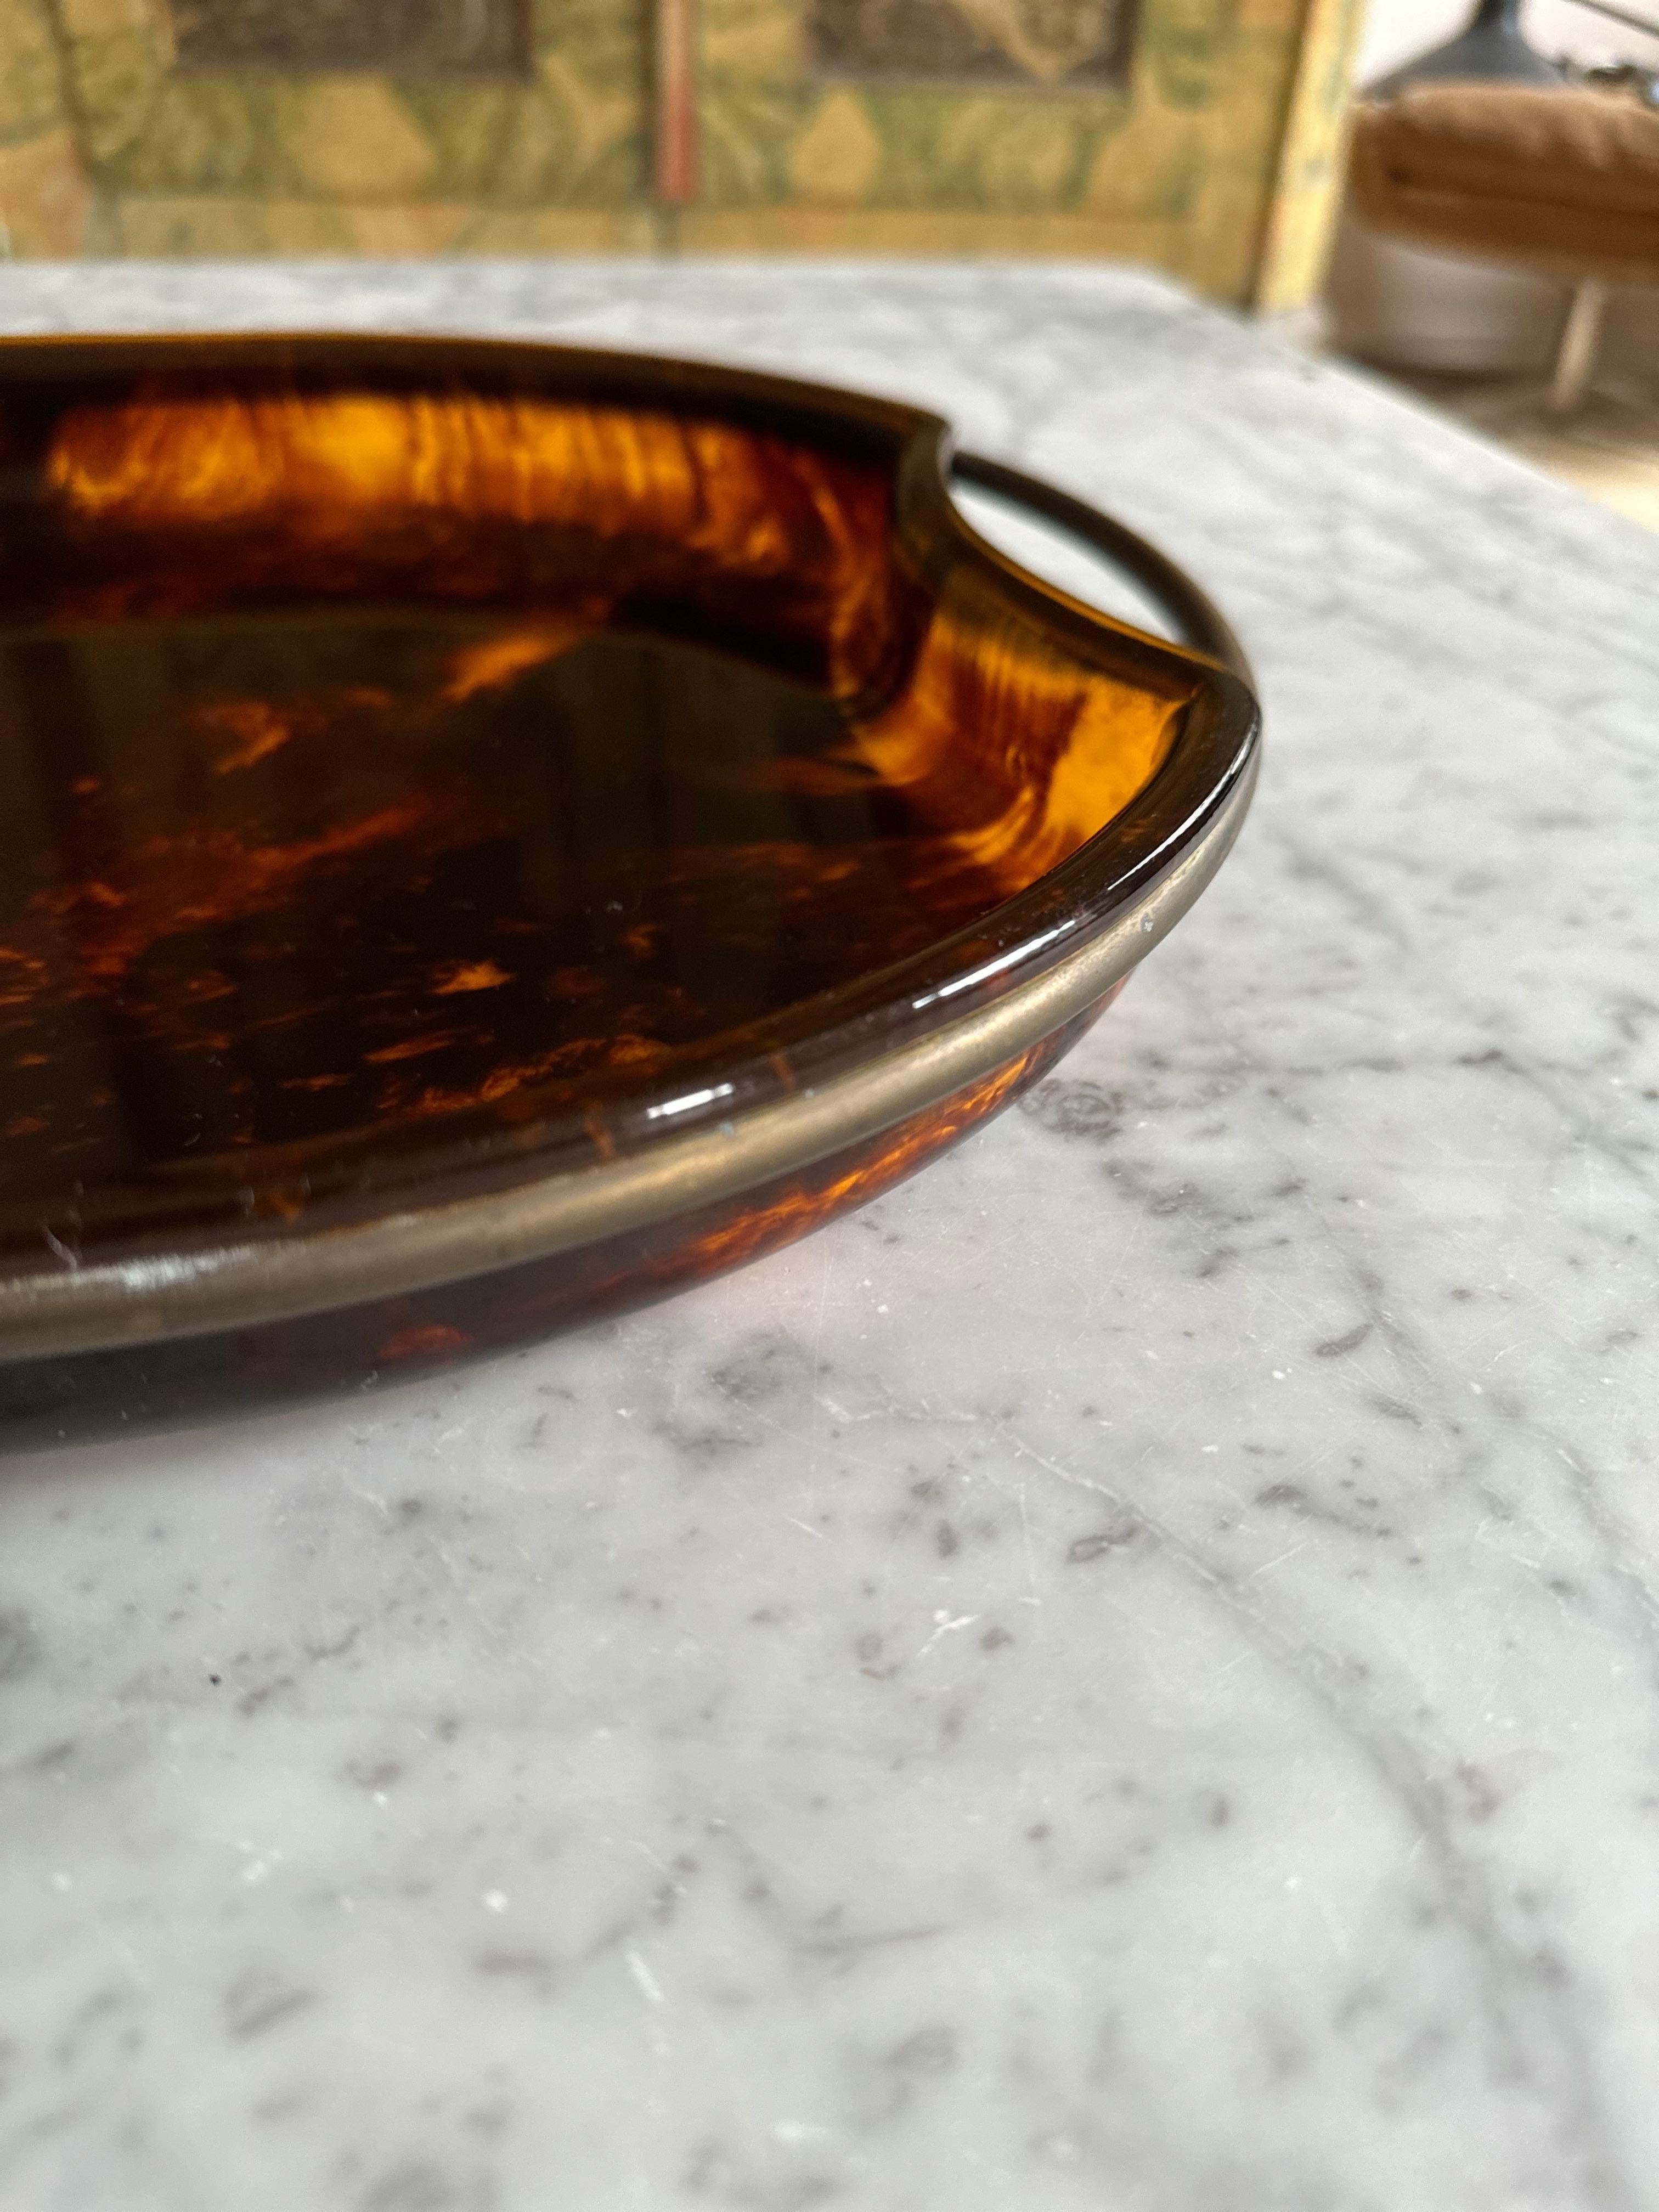  Guzzini’s Oval Lucite Serving Tray from 1970s Italy – Faux Tortoiseshell -brass For Sale 9